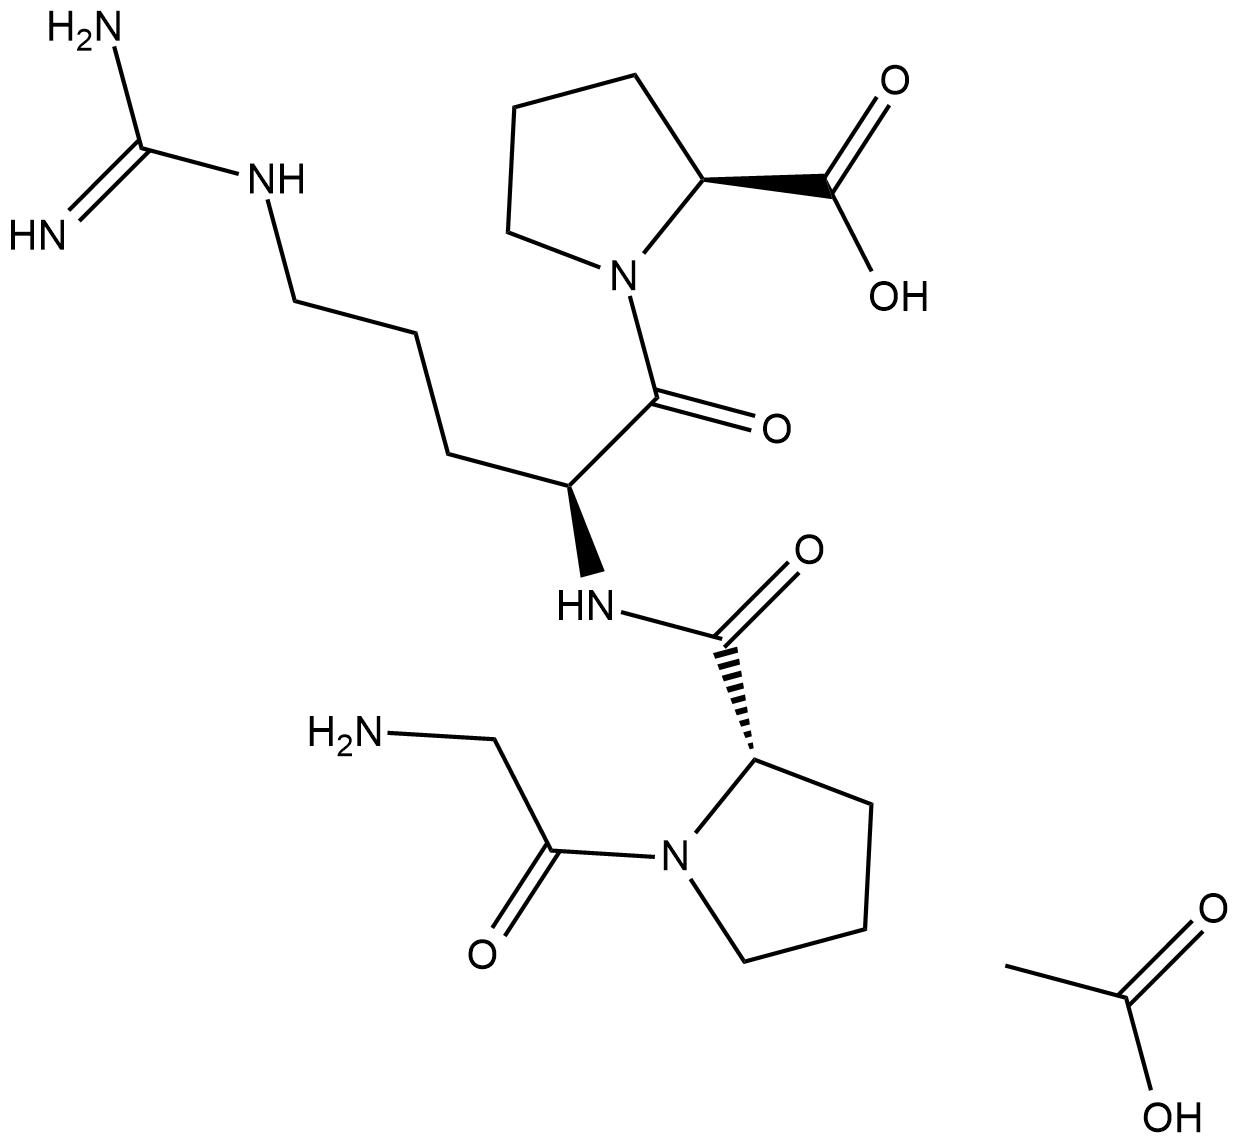 H-Gly-Pro-Arg-Pro-OH (acetate)